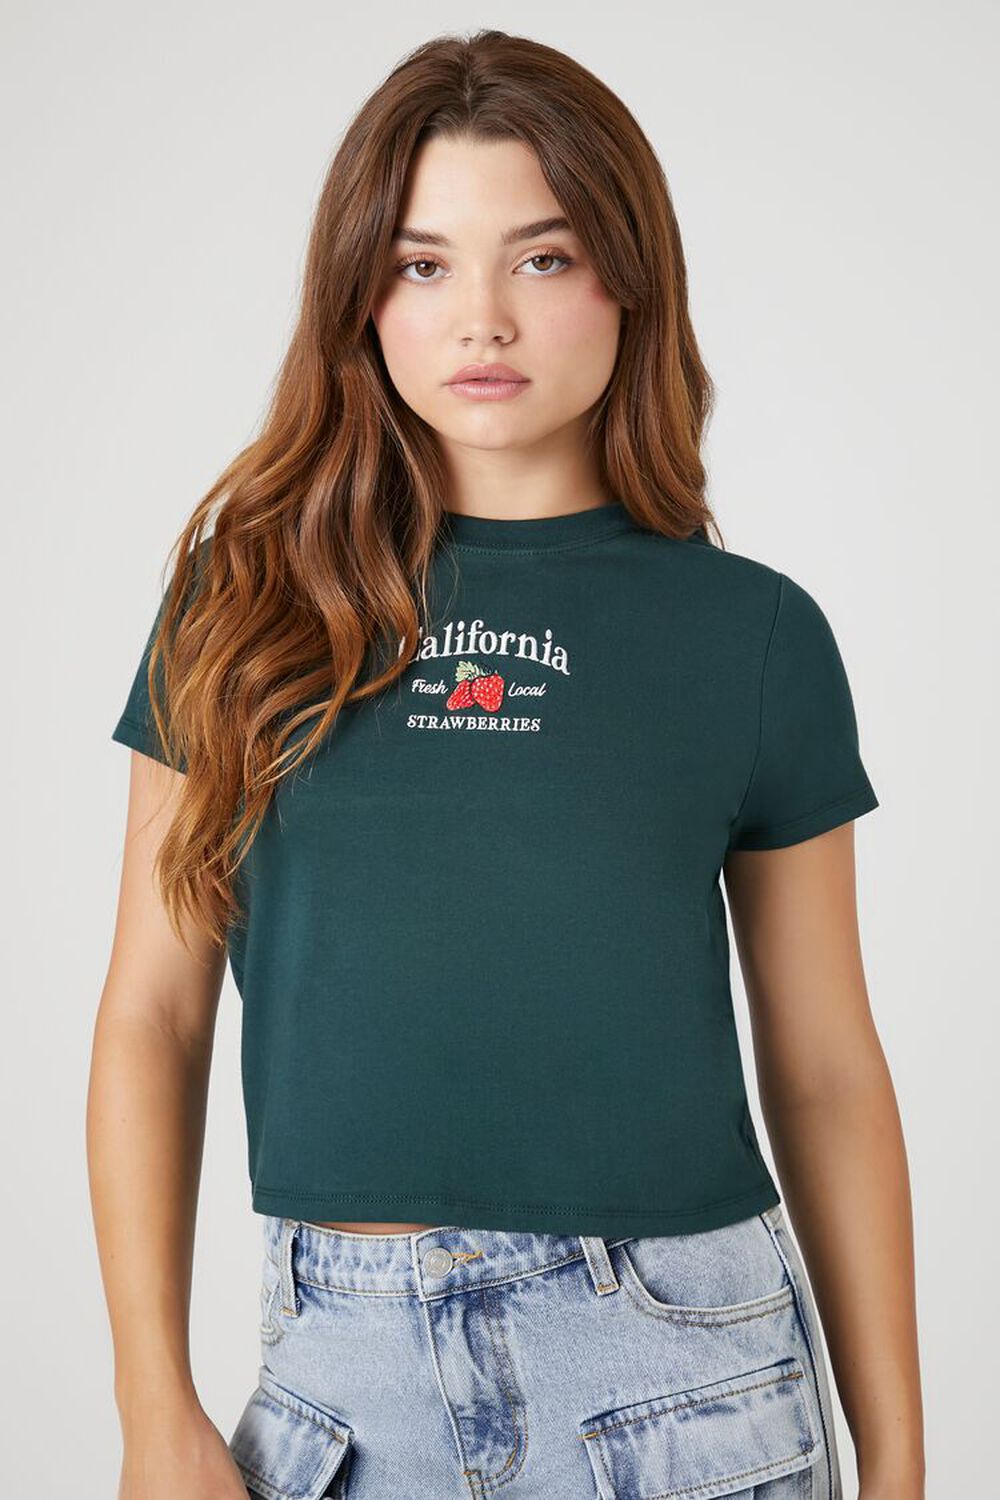 Performance T-shirt in emerald green - The Nines